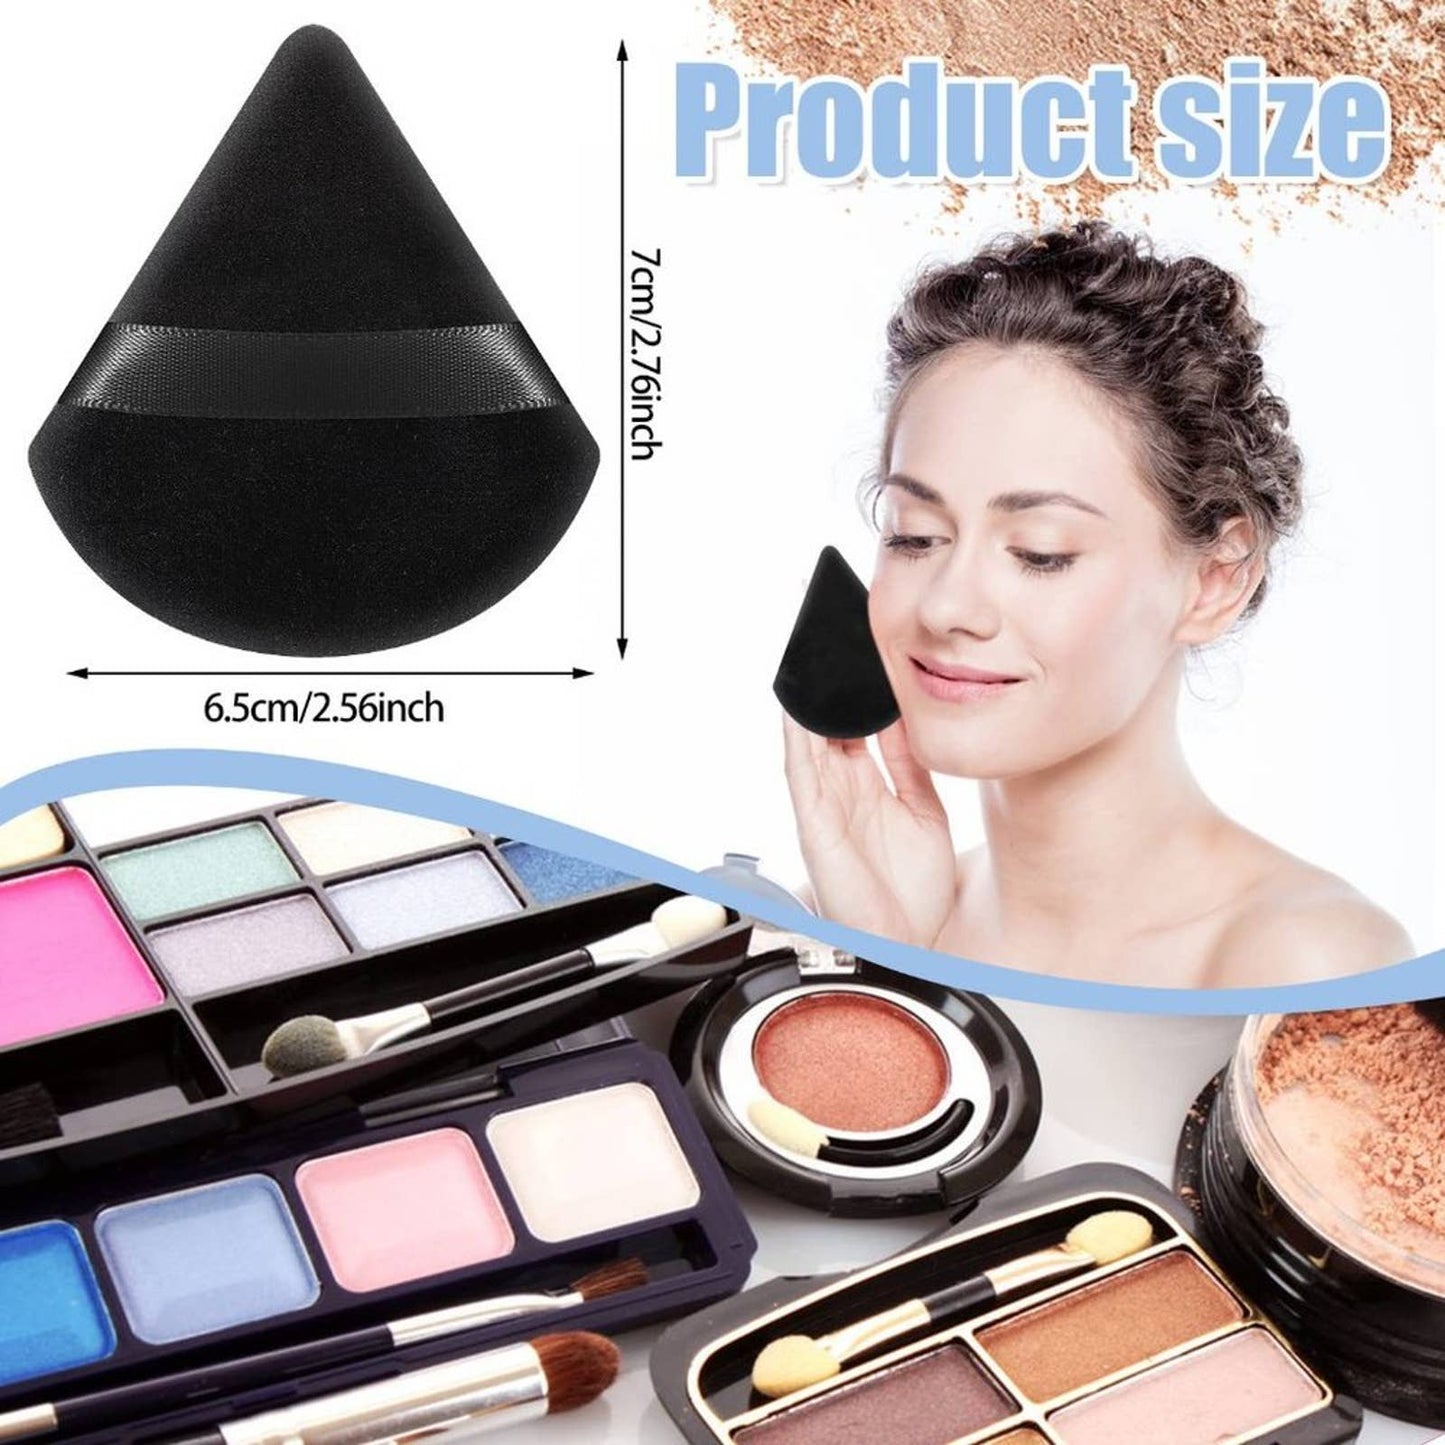 Pimoys 6 Pieces Powder Puff Face Soft Triangle Makeup Puff for Loose Powder